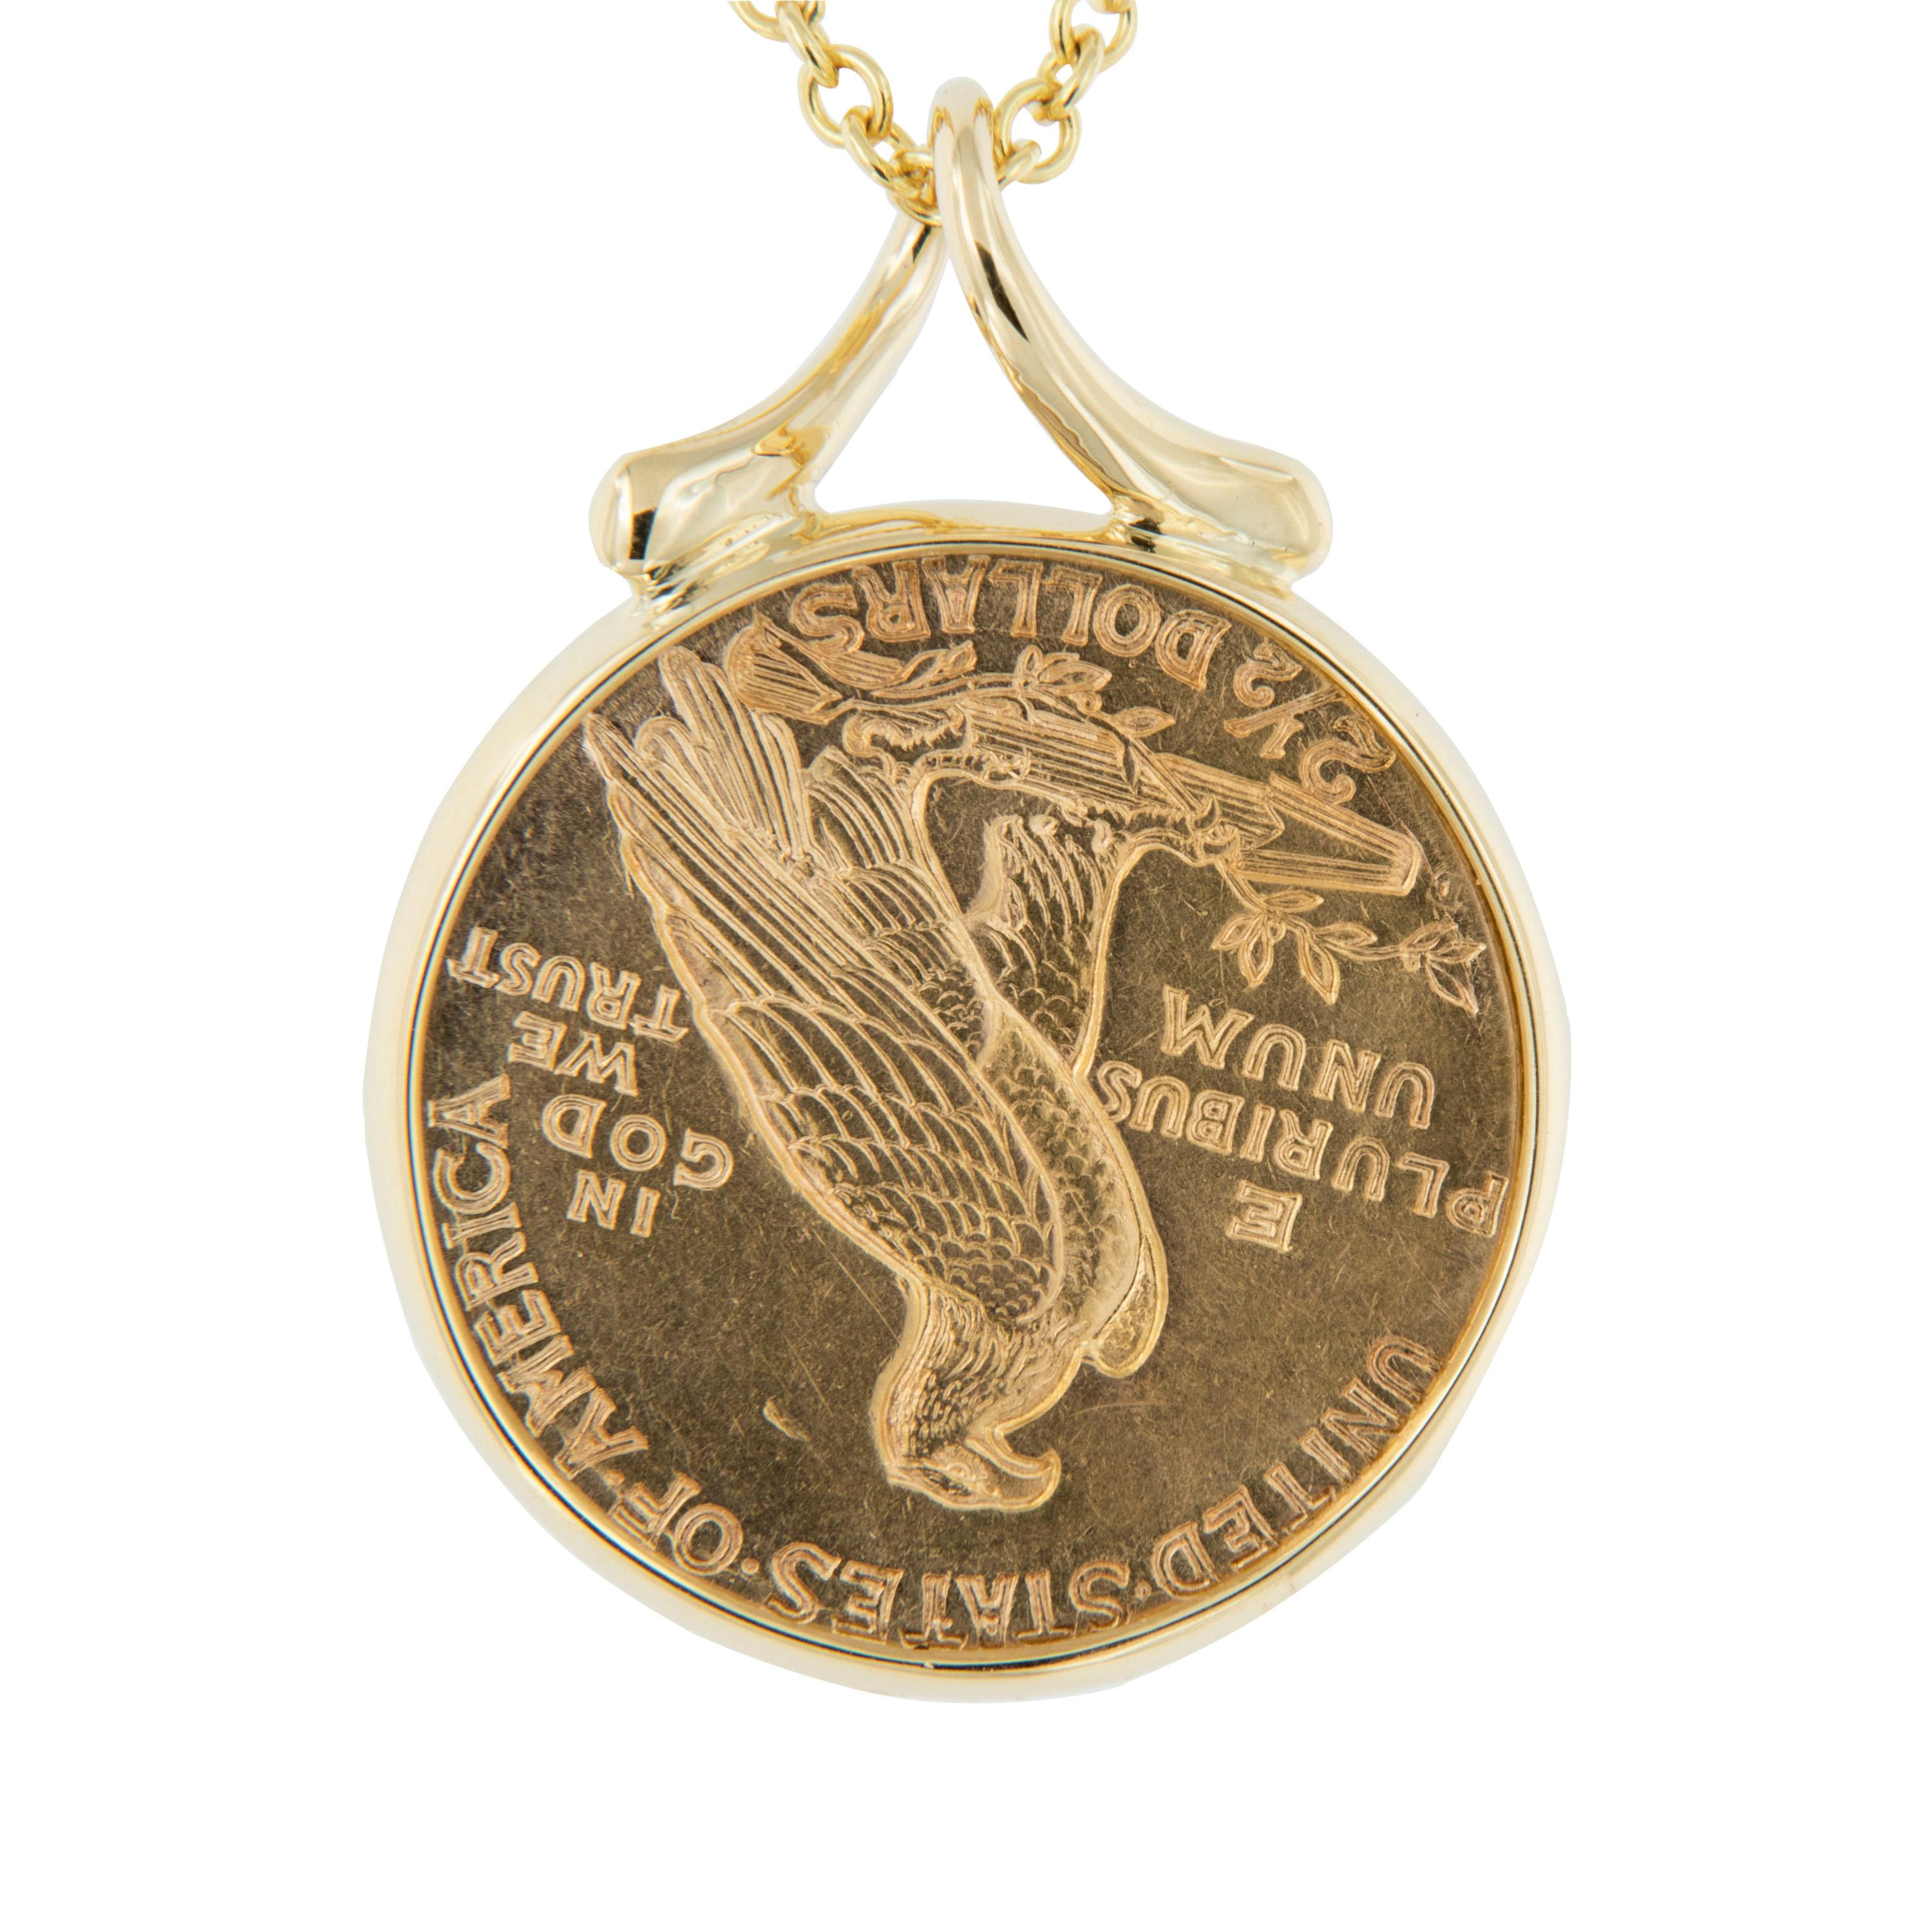 Enjoy a piece of American gold coin history! This 1925 $2.50 Indian head eagle coin is framed in 18k yellow gold and suspends from a ribbon-style bail on a 16-inch chain. Pendant measures 25mm x 19mm. Weighs 8.7 grams.